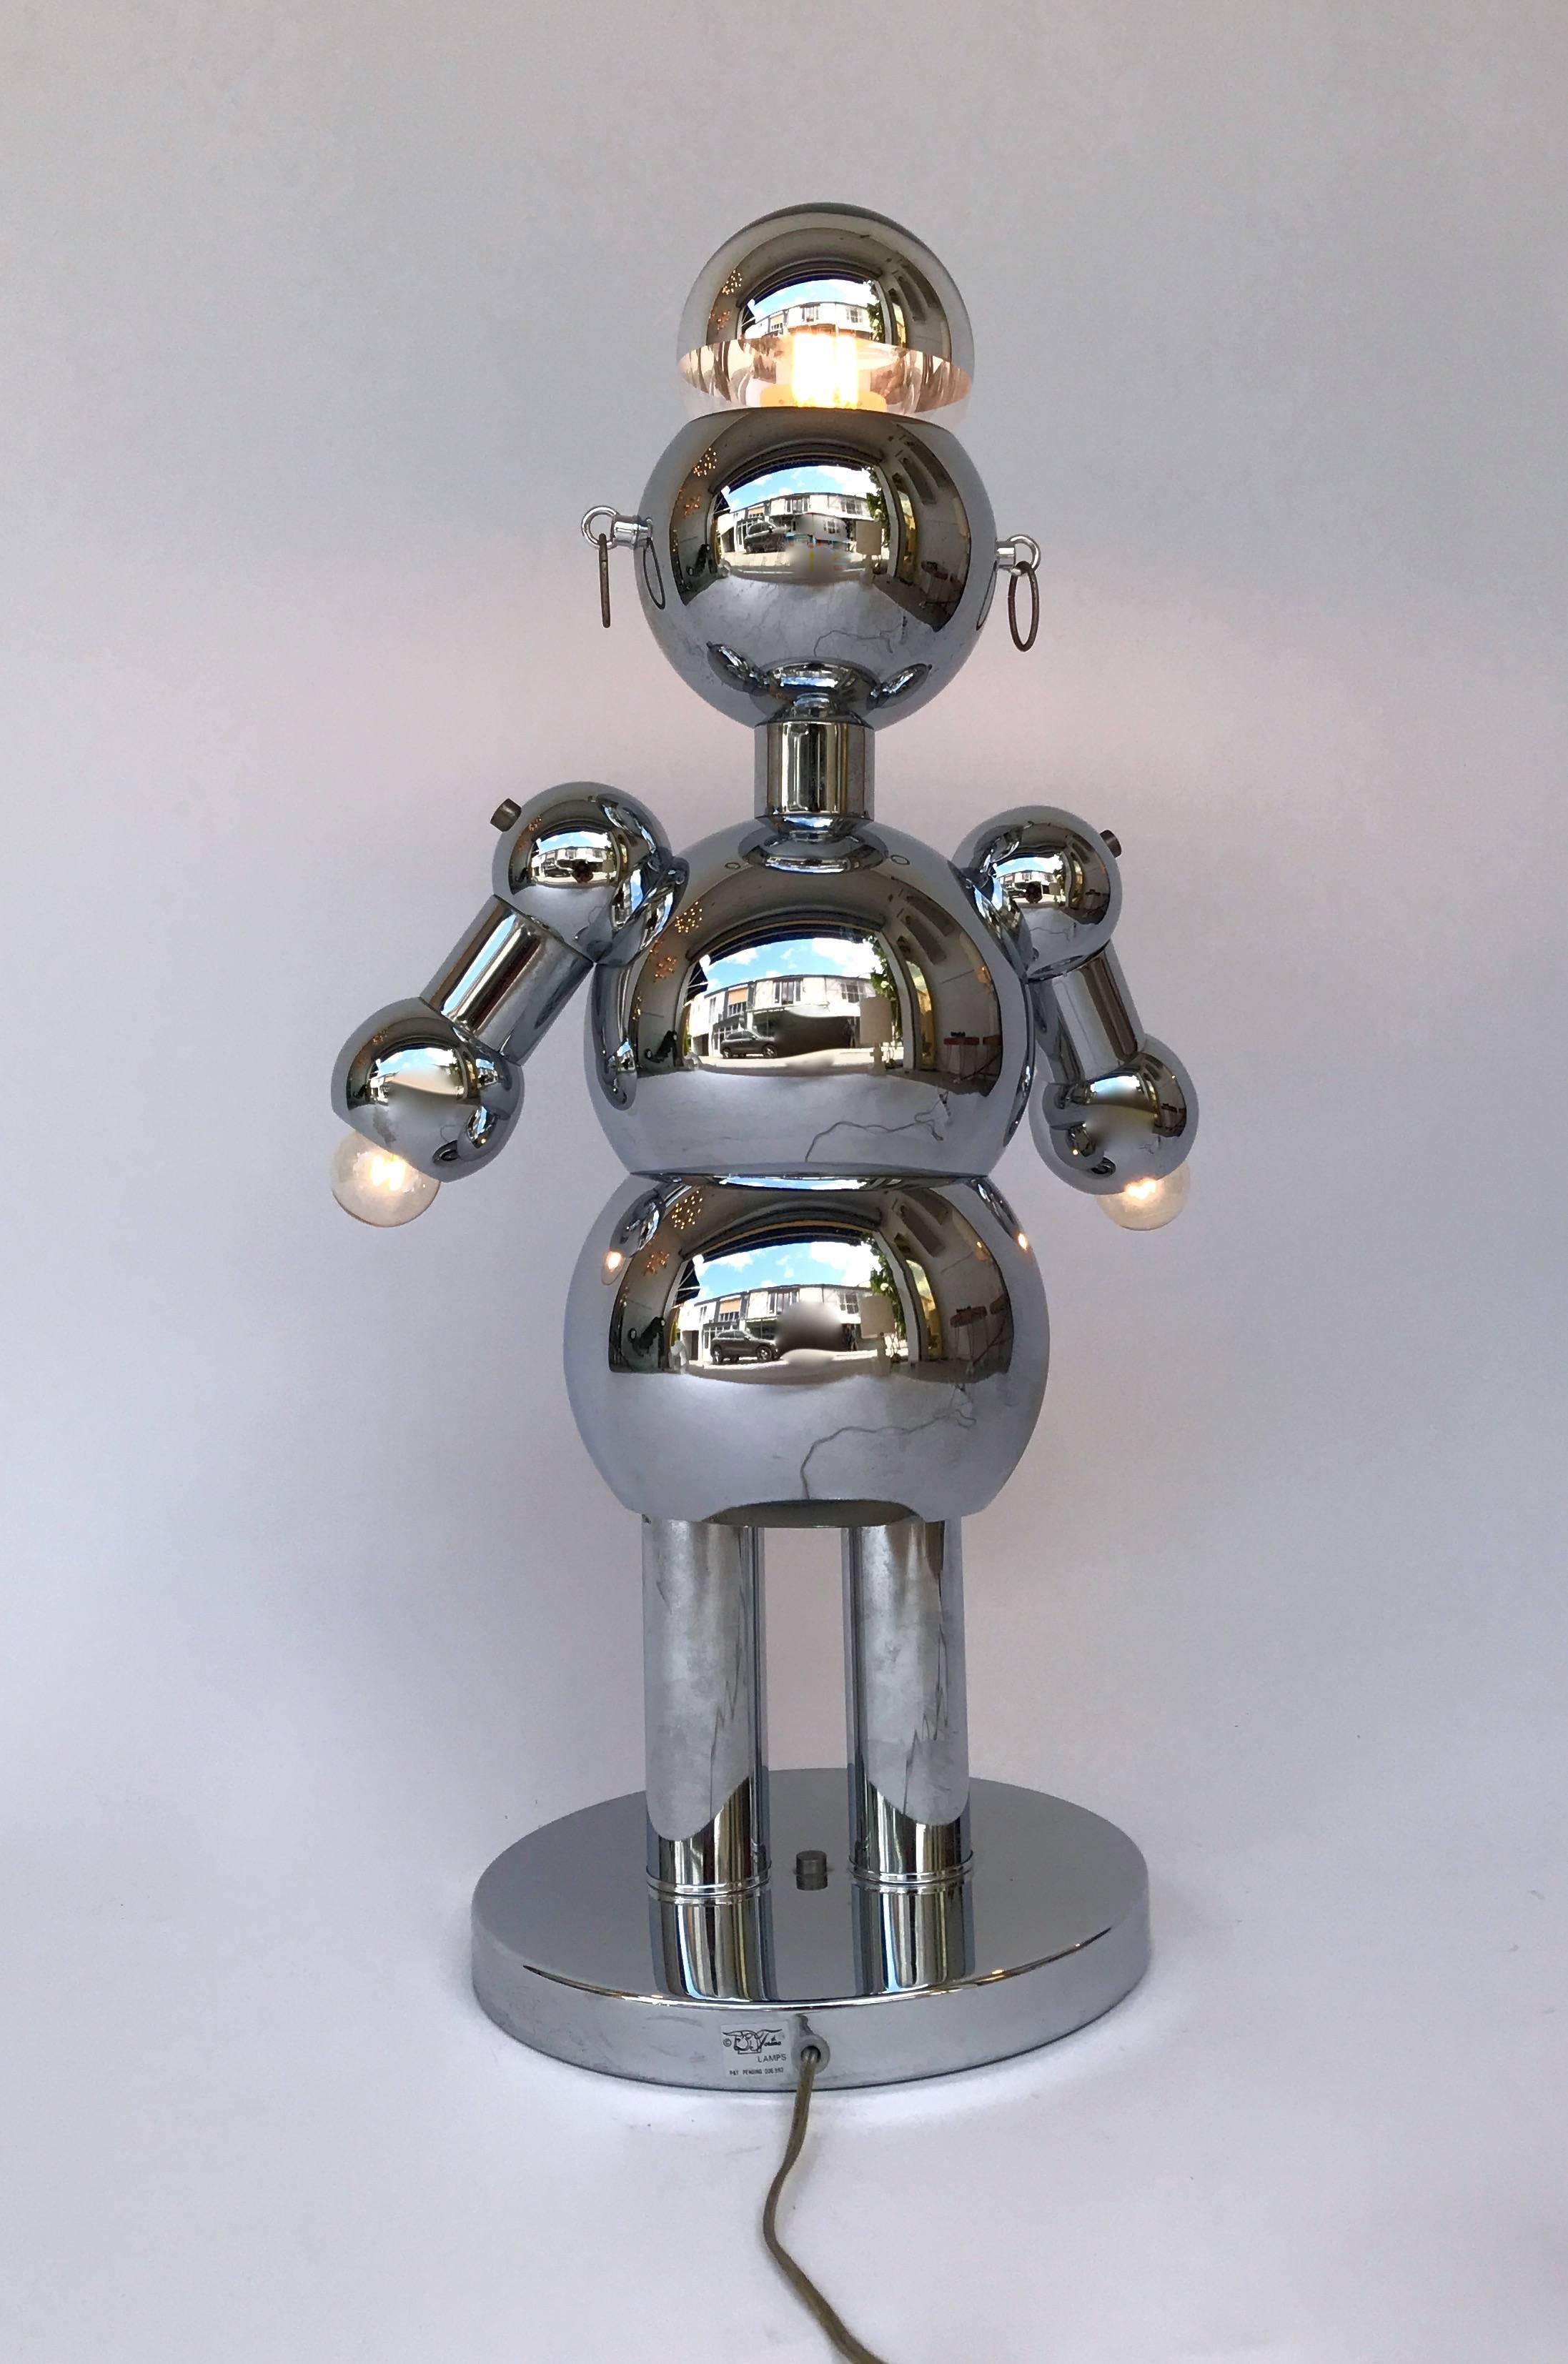 Space Age Robot Lamp by Torino Lamps, USA 1970s